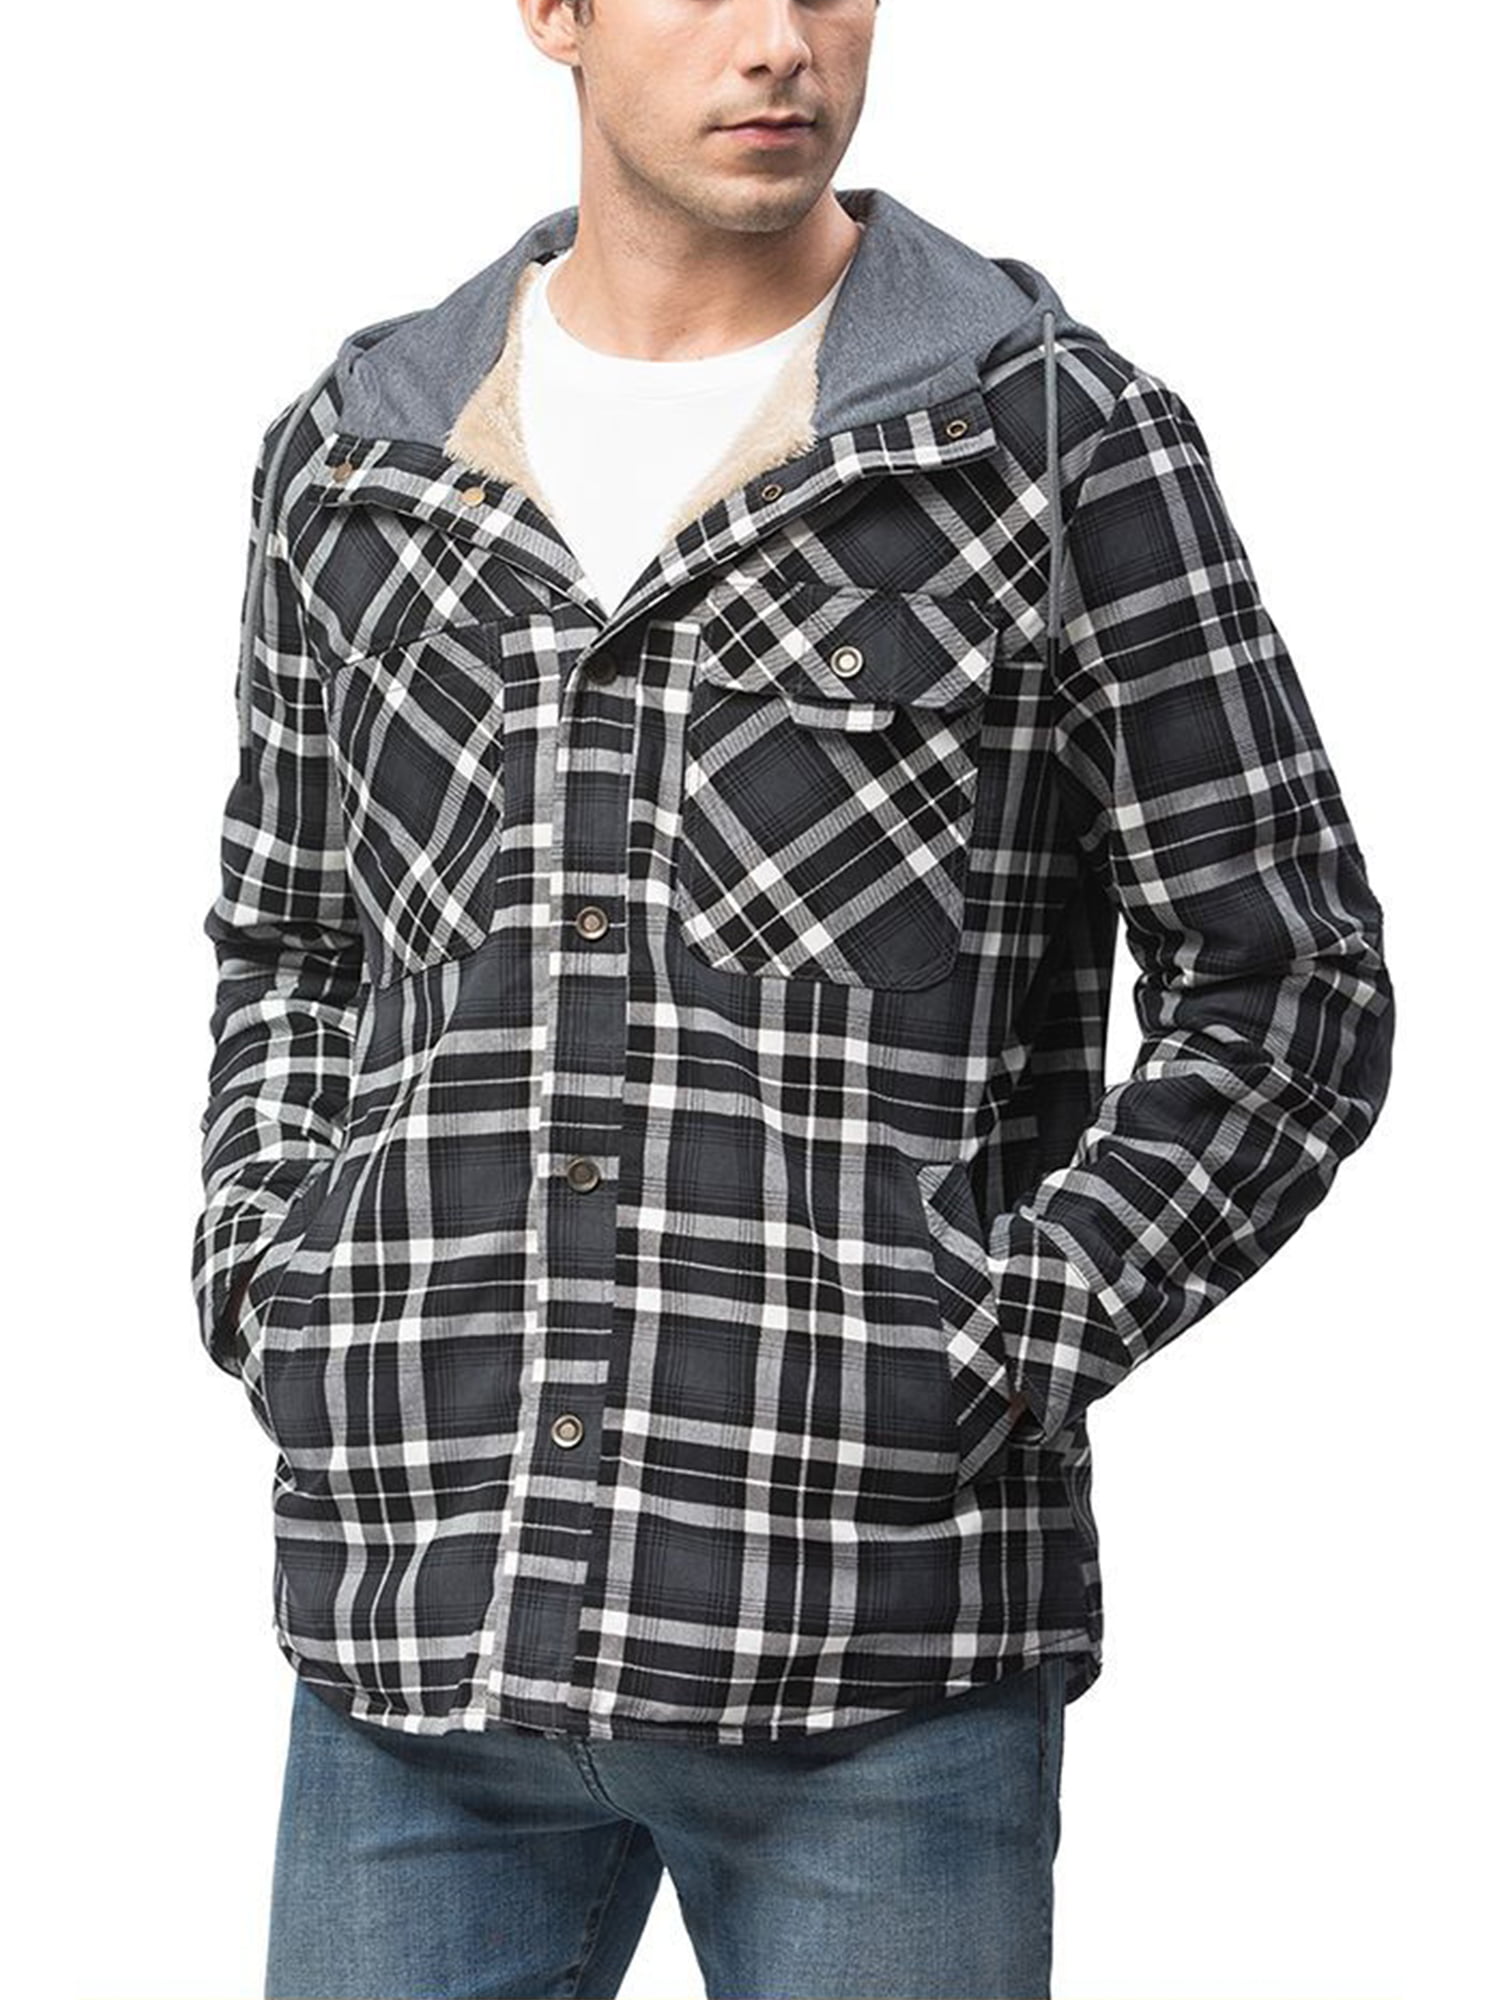 Milamy Mens Casual Plaid Shirts Comfy Flannel Warm Lined Jacket Classic Standard-Fit Long-Sleeve Lapel Outwear 